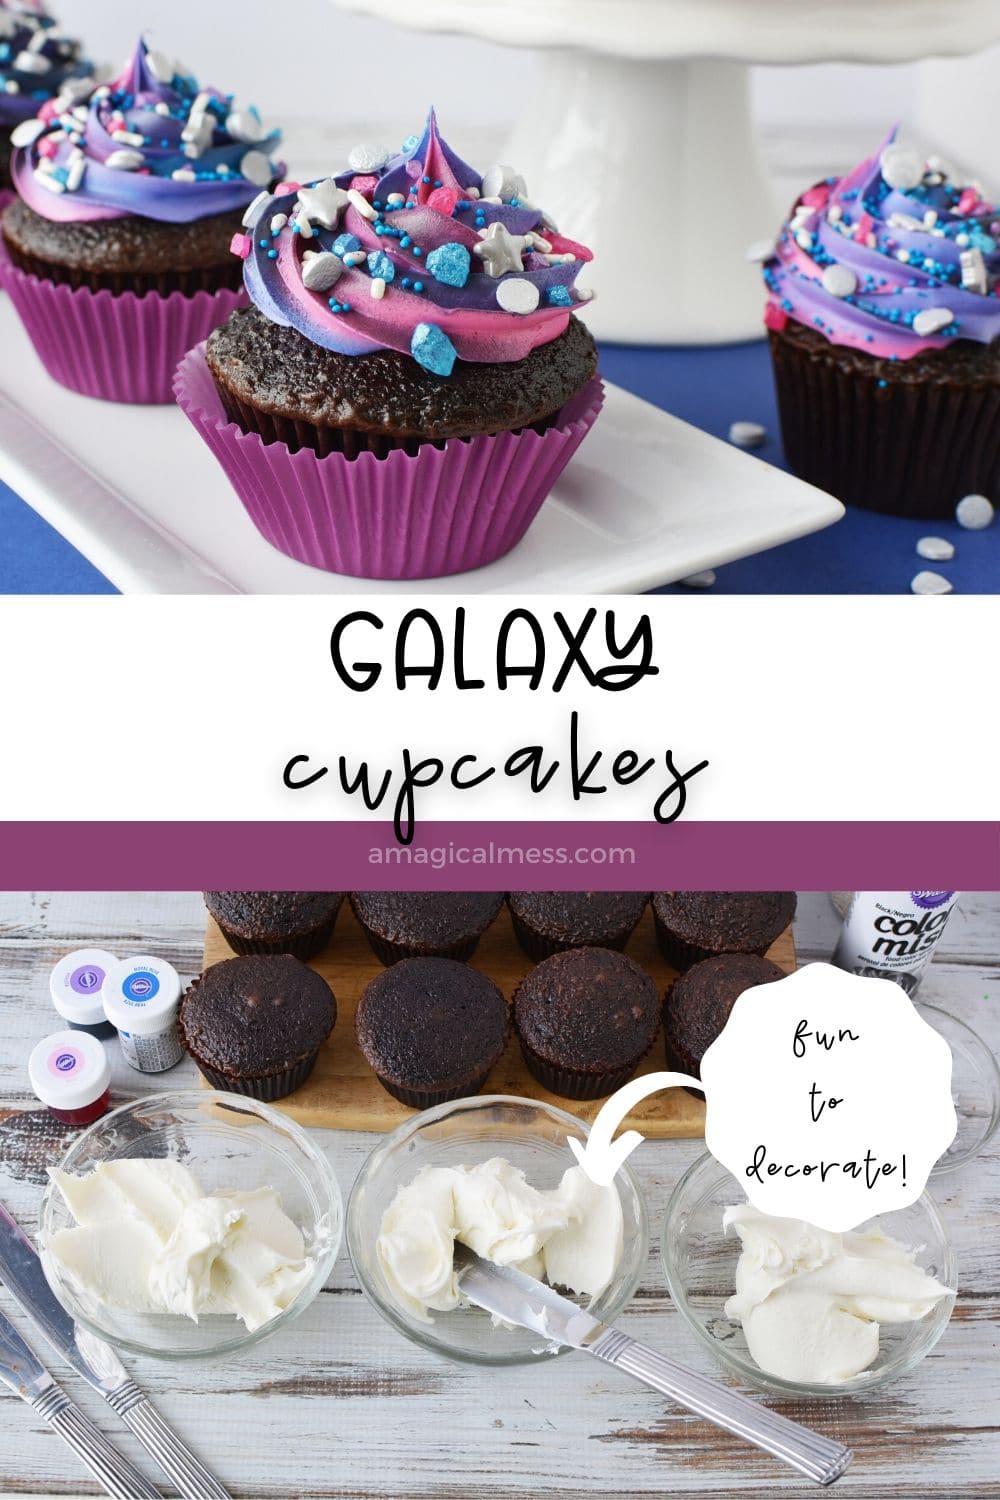 galaxy cupcakes on a plate and ingredients